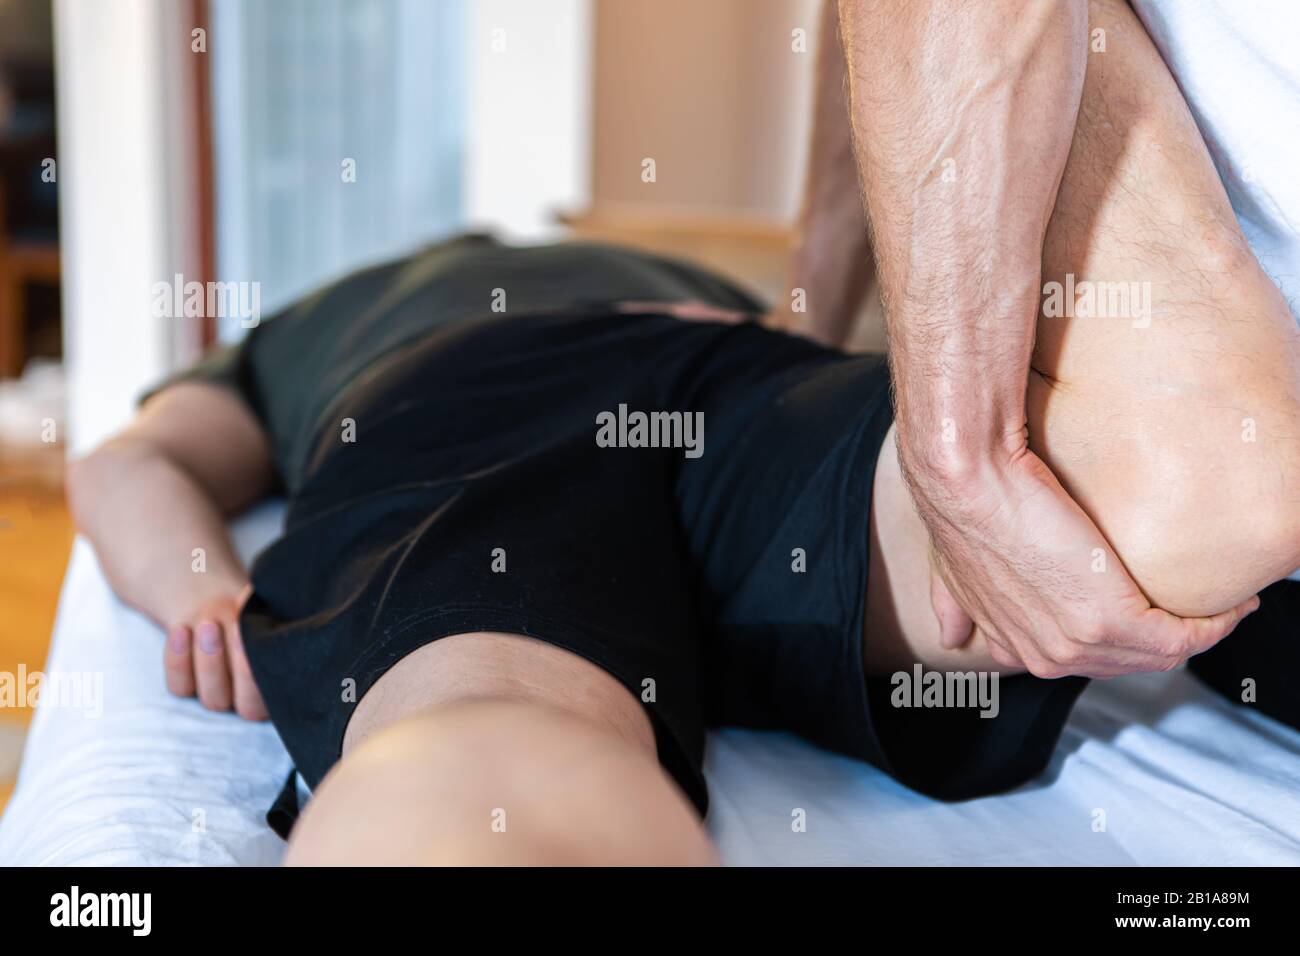 A middle-aged male getting a relaxing leg massage after hard work and training at the gym. Close-up view of masseur hands giving massage therapy Stock Photo